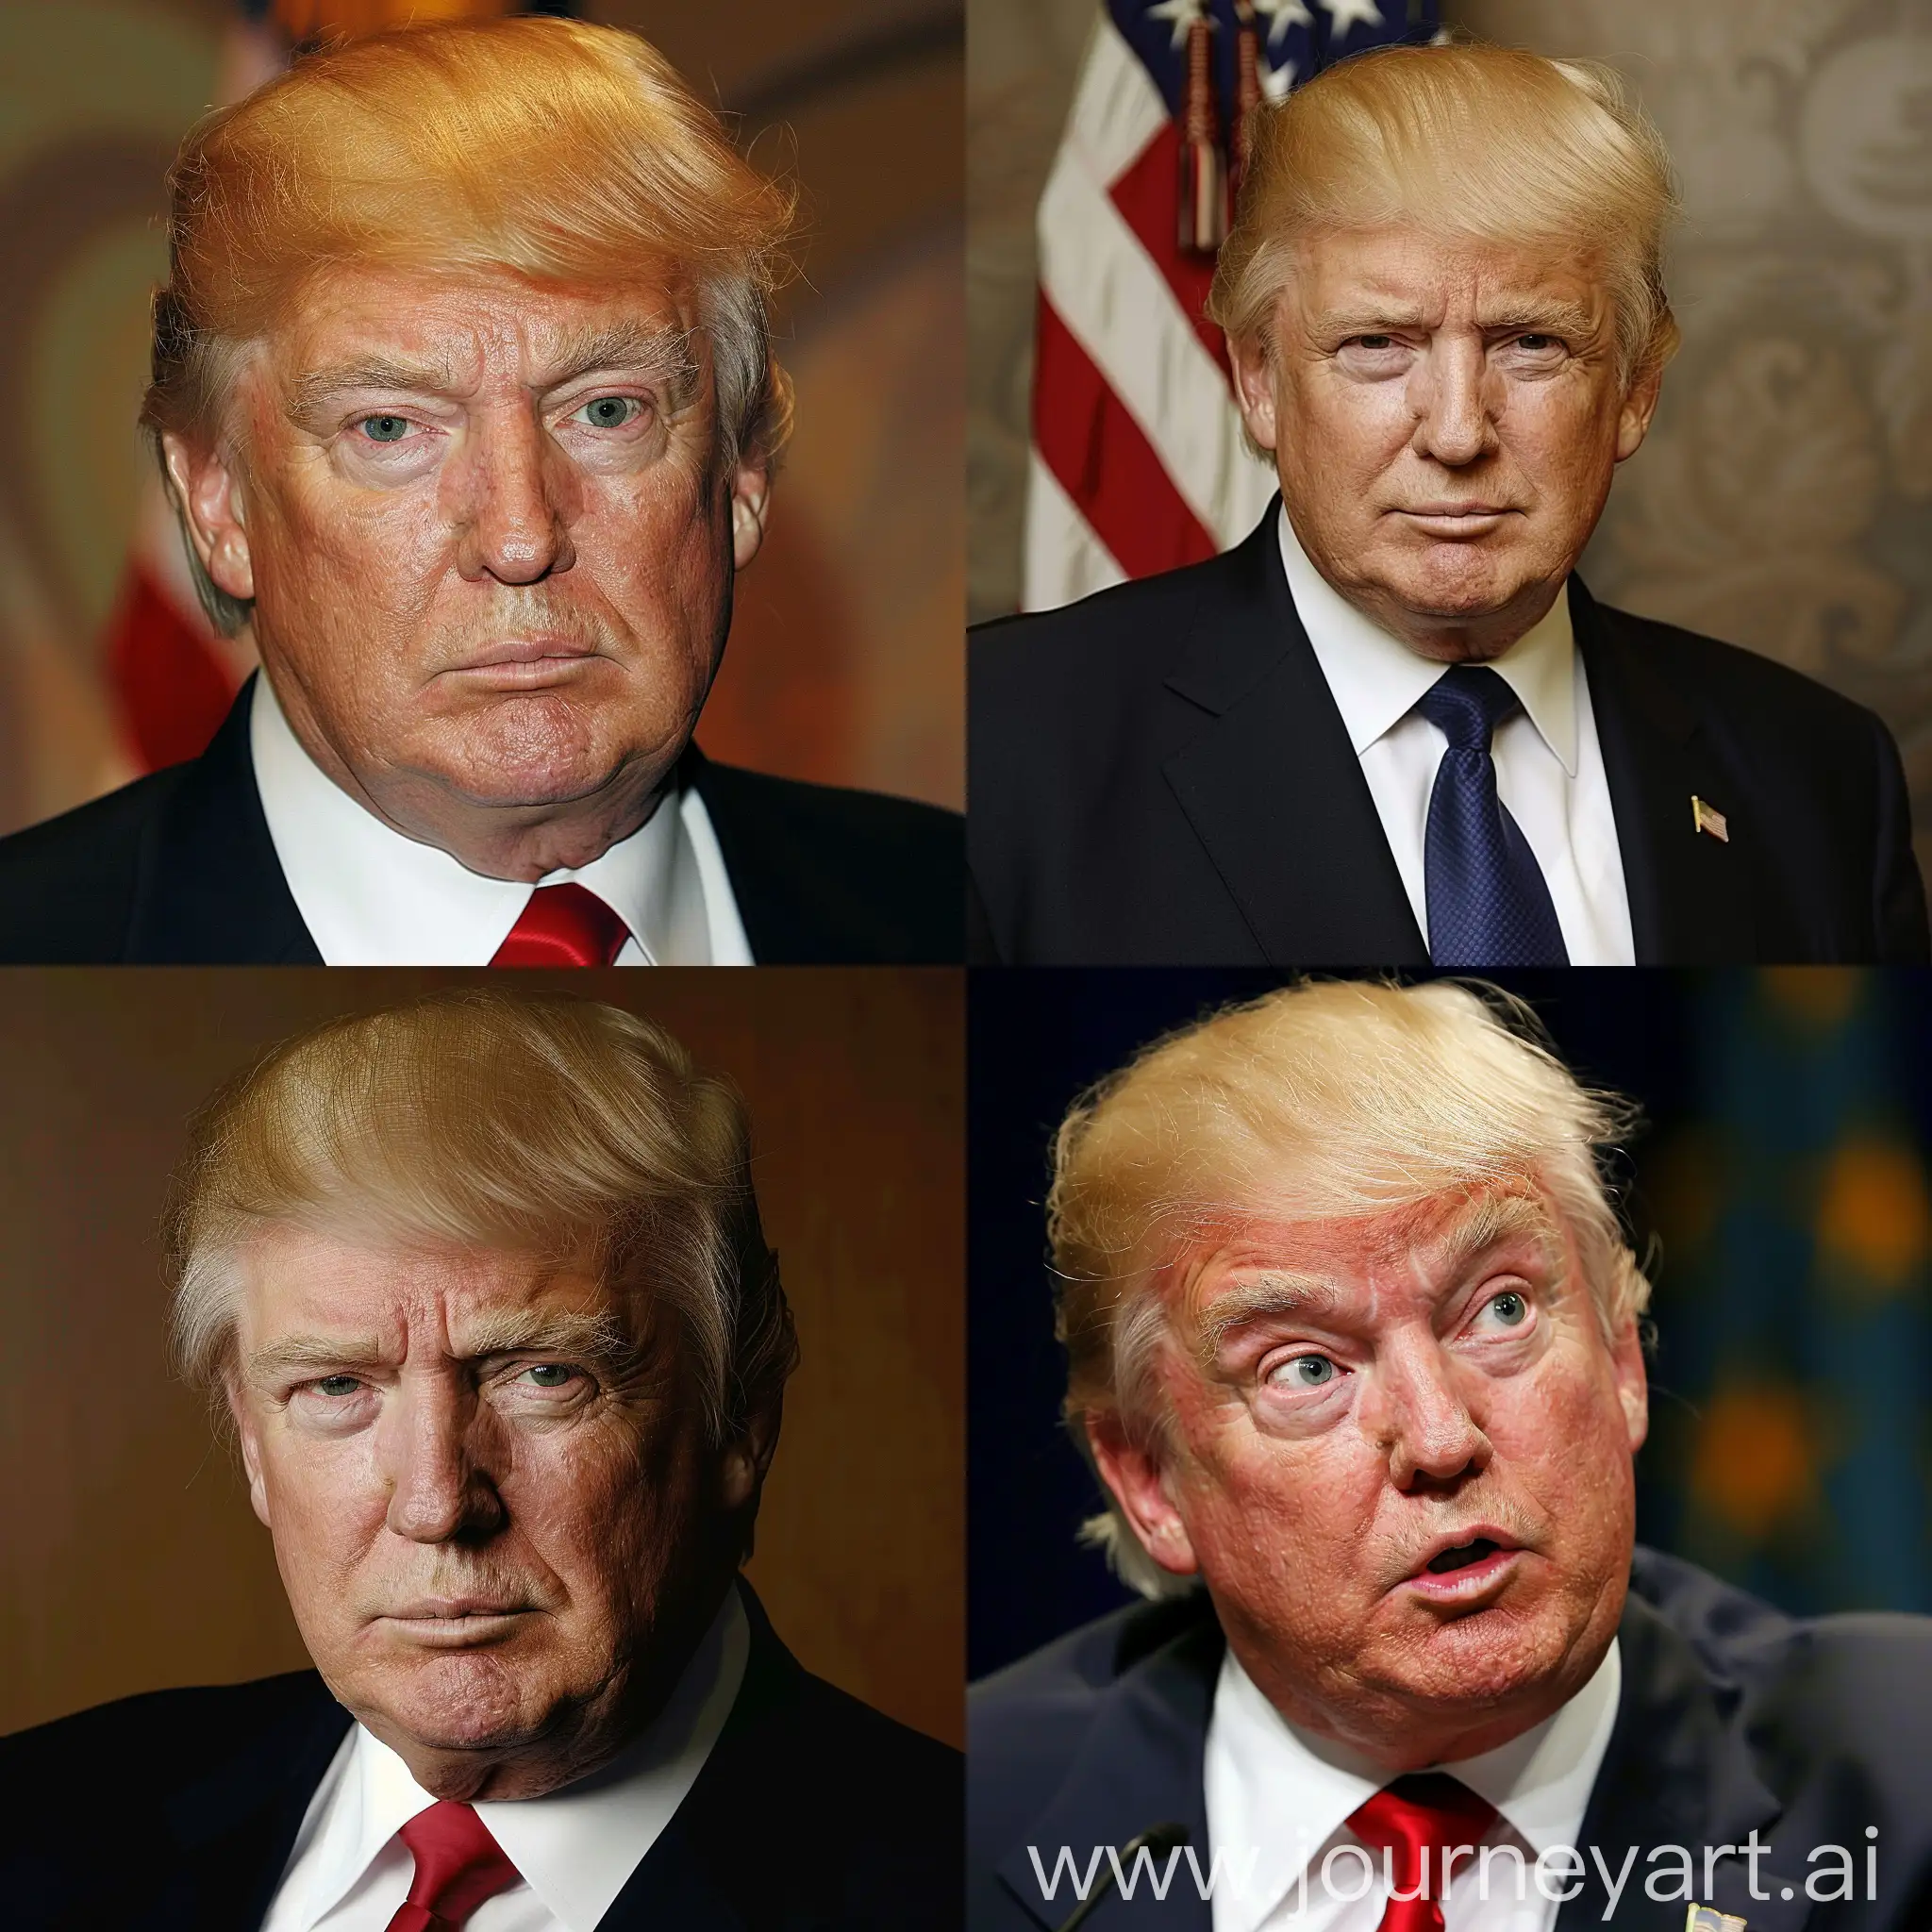 Donald-Trump-Portrait-with-American-Flag-Background